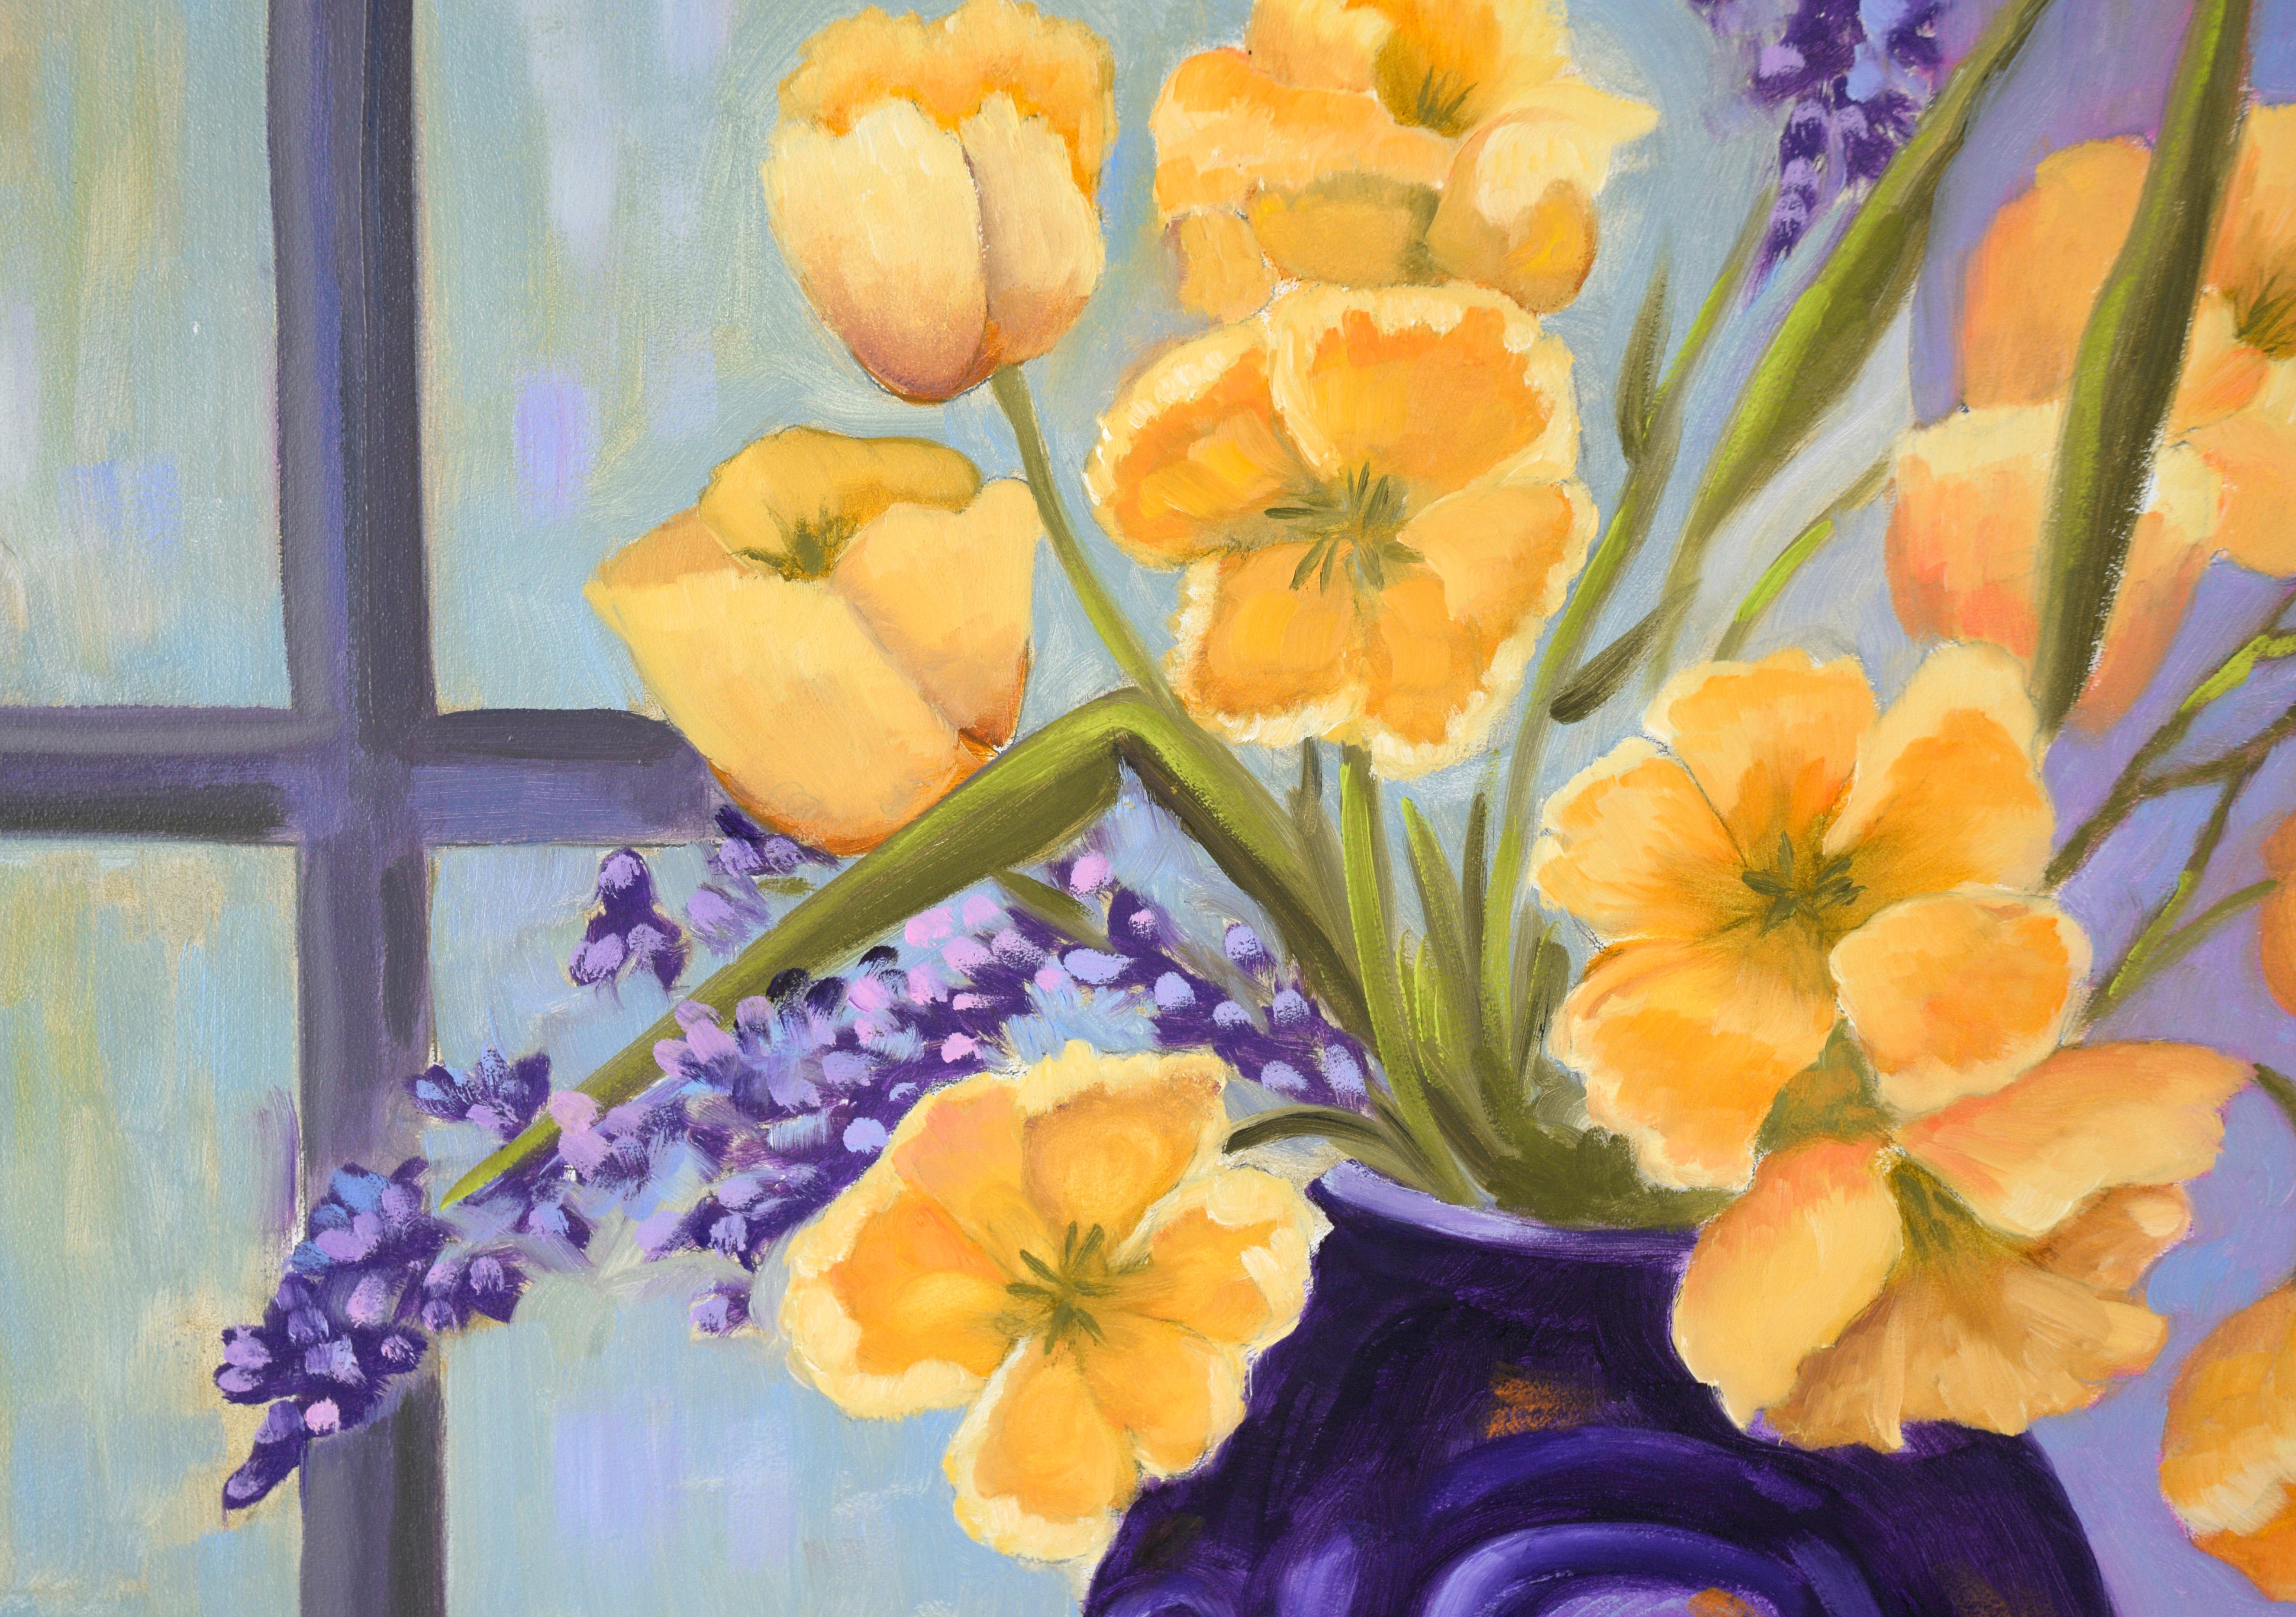 Bouquet of Golden Poppies and Wild Irises in Oil on Masonite

Vibrant bouquet in a purple vase by Novato artist Gail Wilhelm (American, 1938-2018). Bright yellow-orange California Poppies are arranged in a vase with purple wild irises. The vase is a